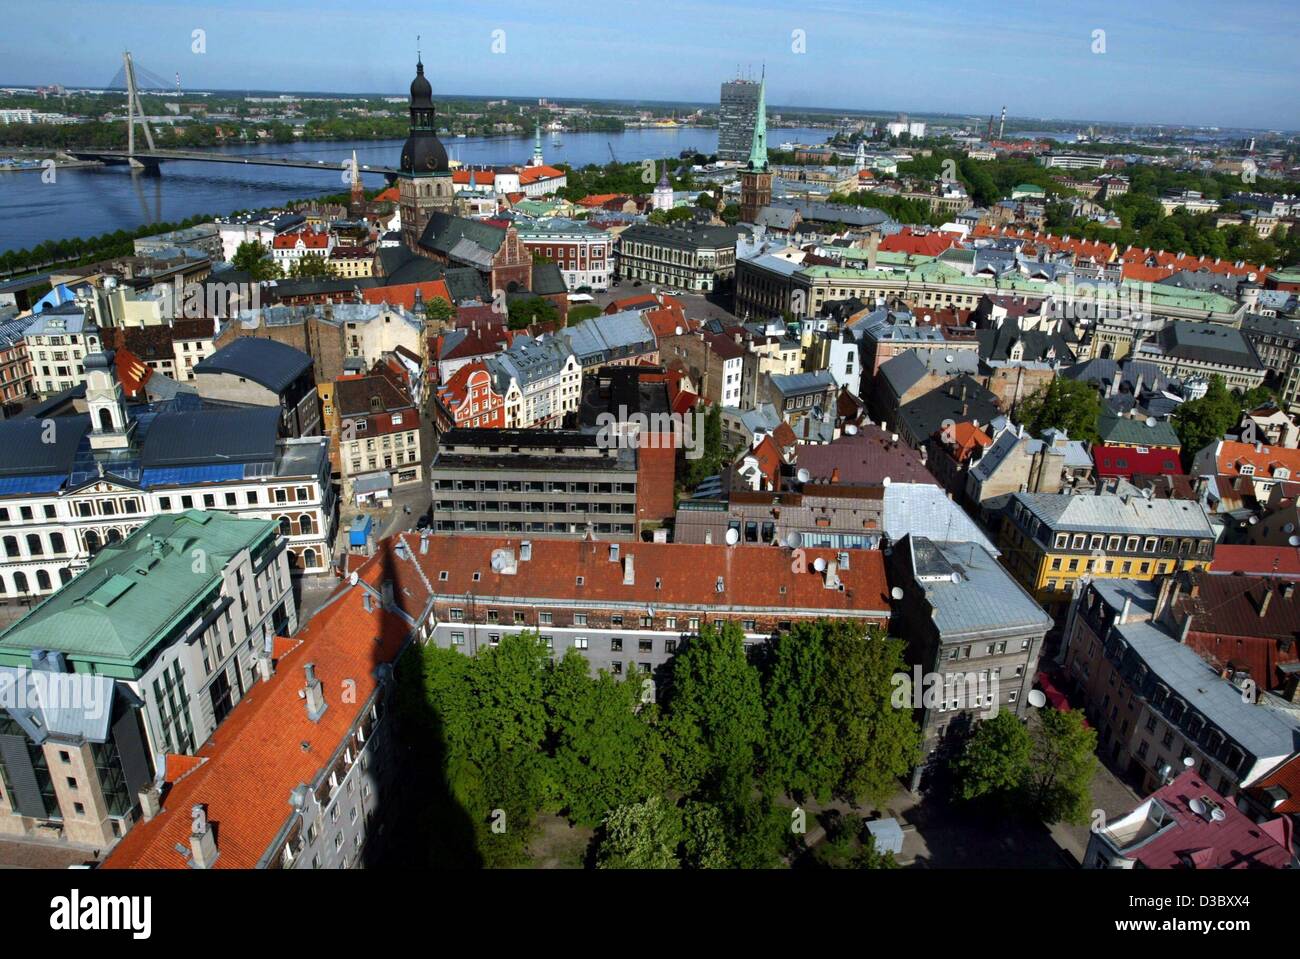 (dpa) - A view from the top of St Peter's Church over the city of Riga, Latvia, 22 May 2003. In the centre the black tower of the Dome Cathedral, to the right with the greenish tower St. Jacob's Church, in the background the Daugava River. Riga was once a major center of the Hanseatic League and pro Stock Photo